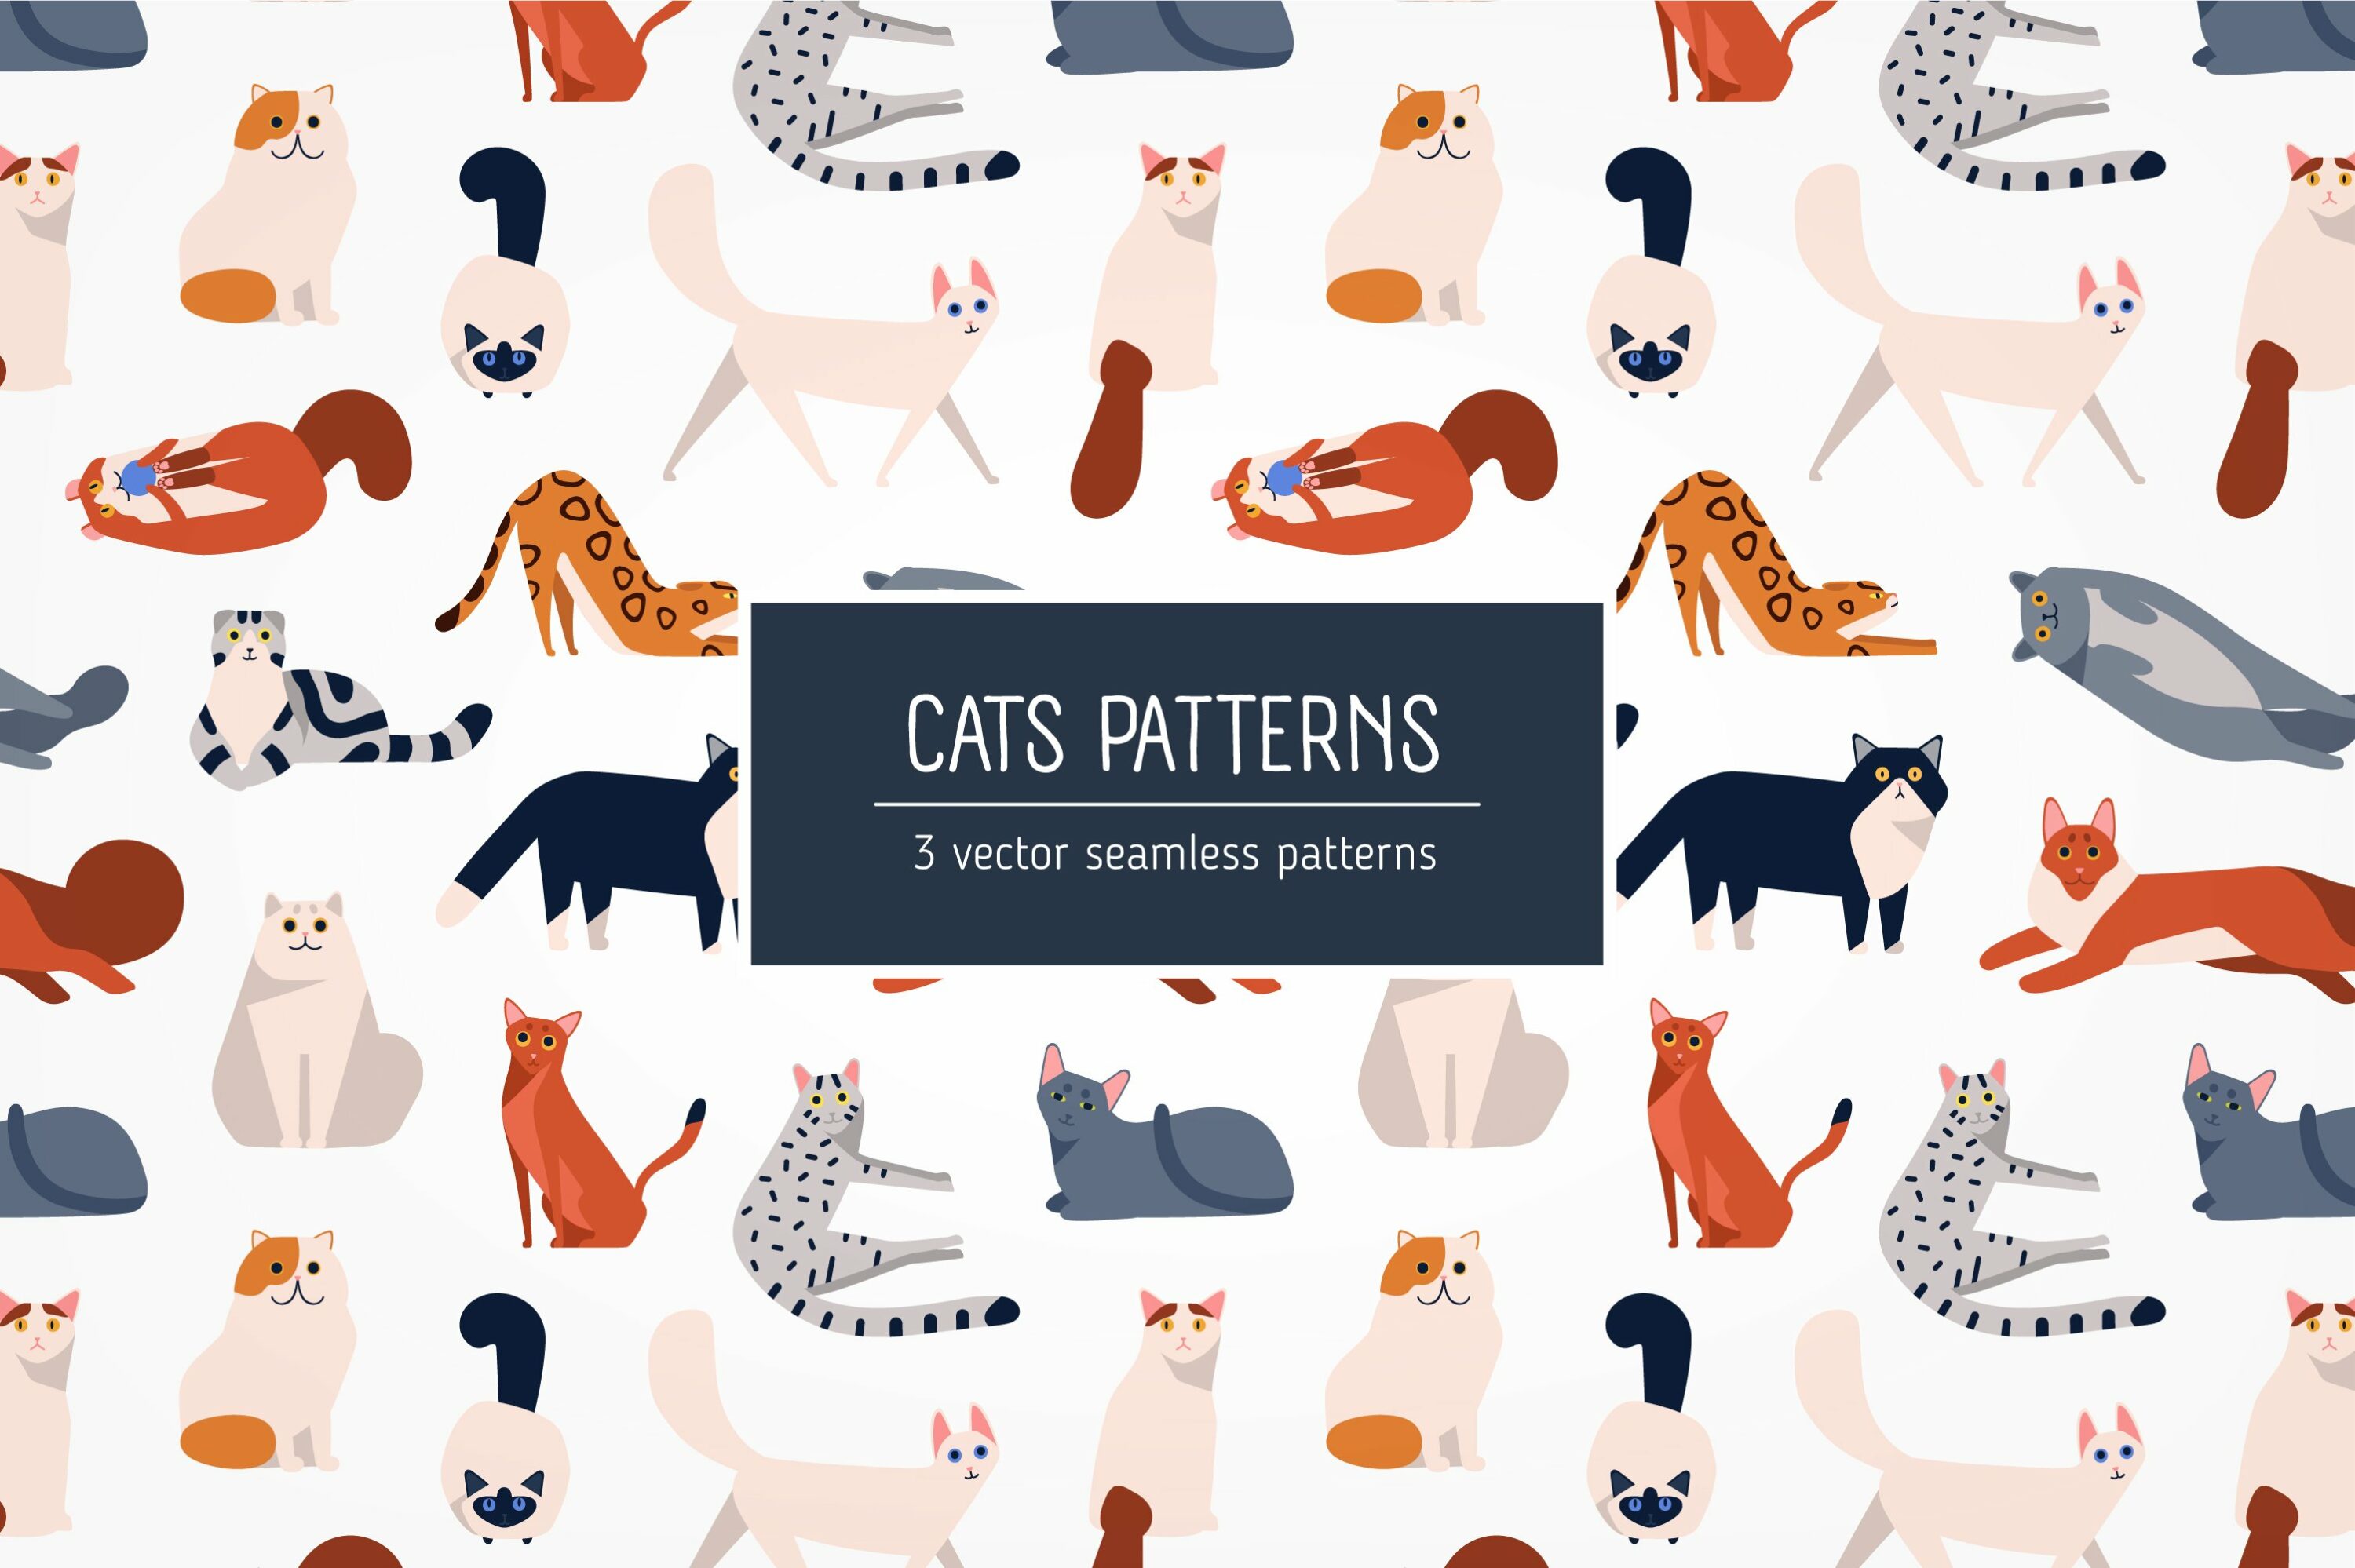 Cat patterns for various projects.